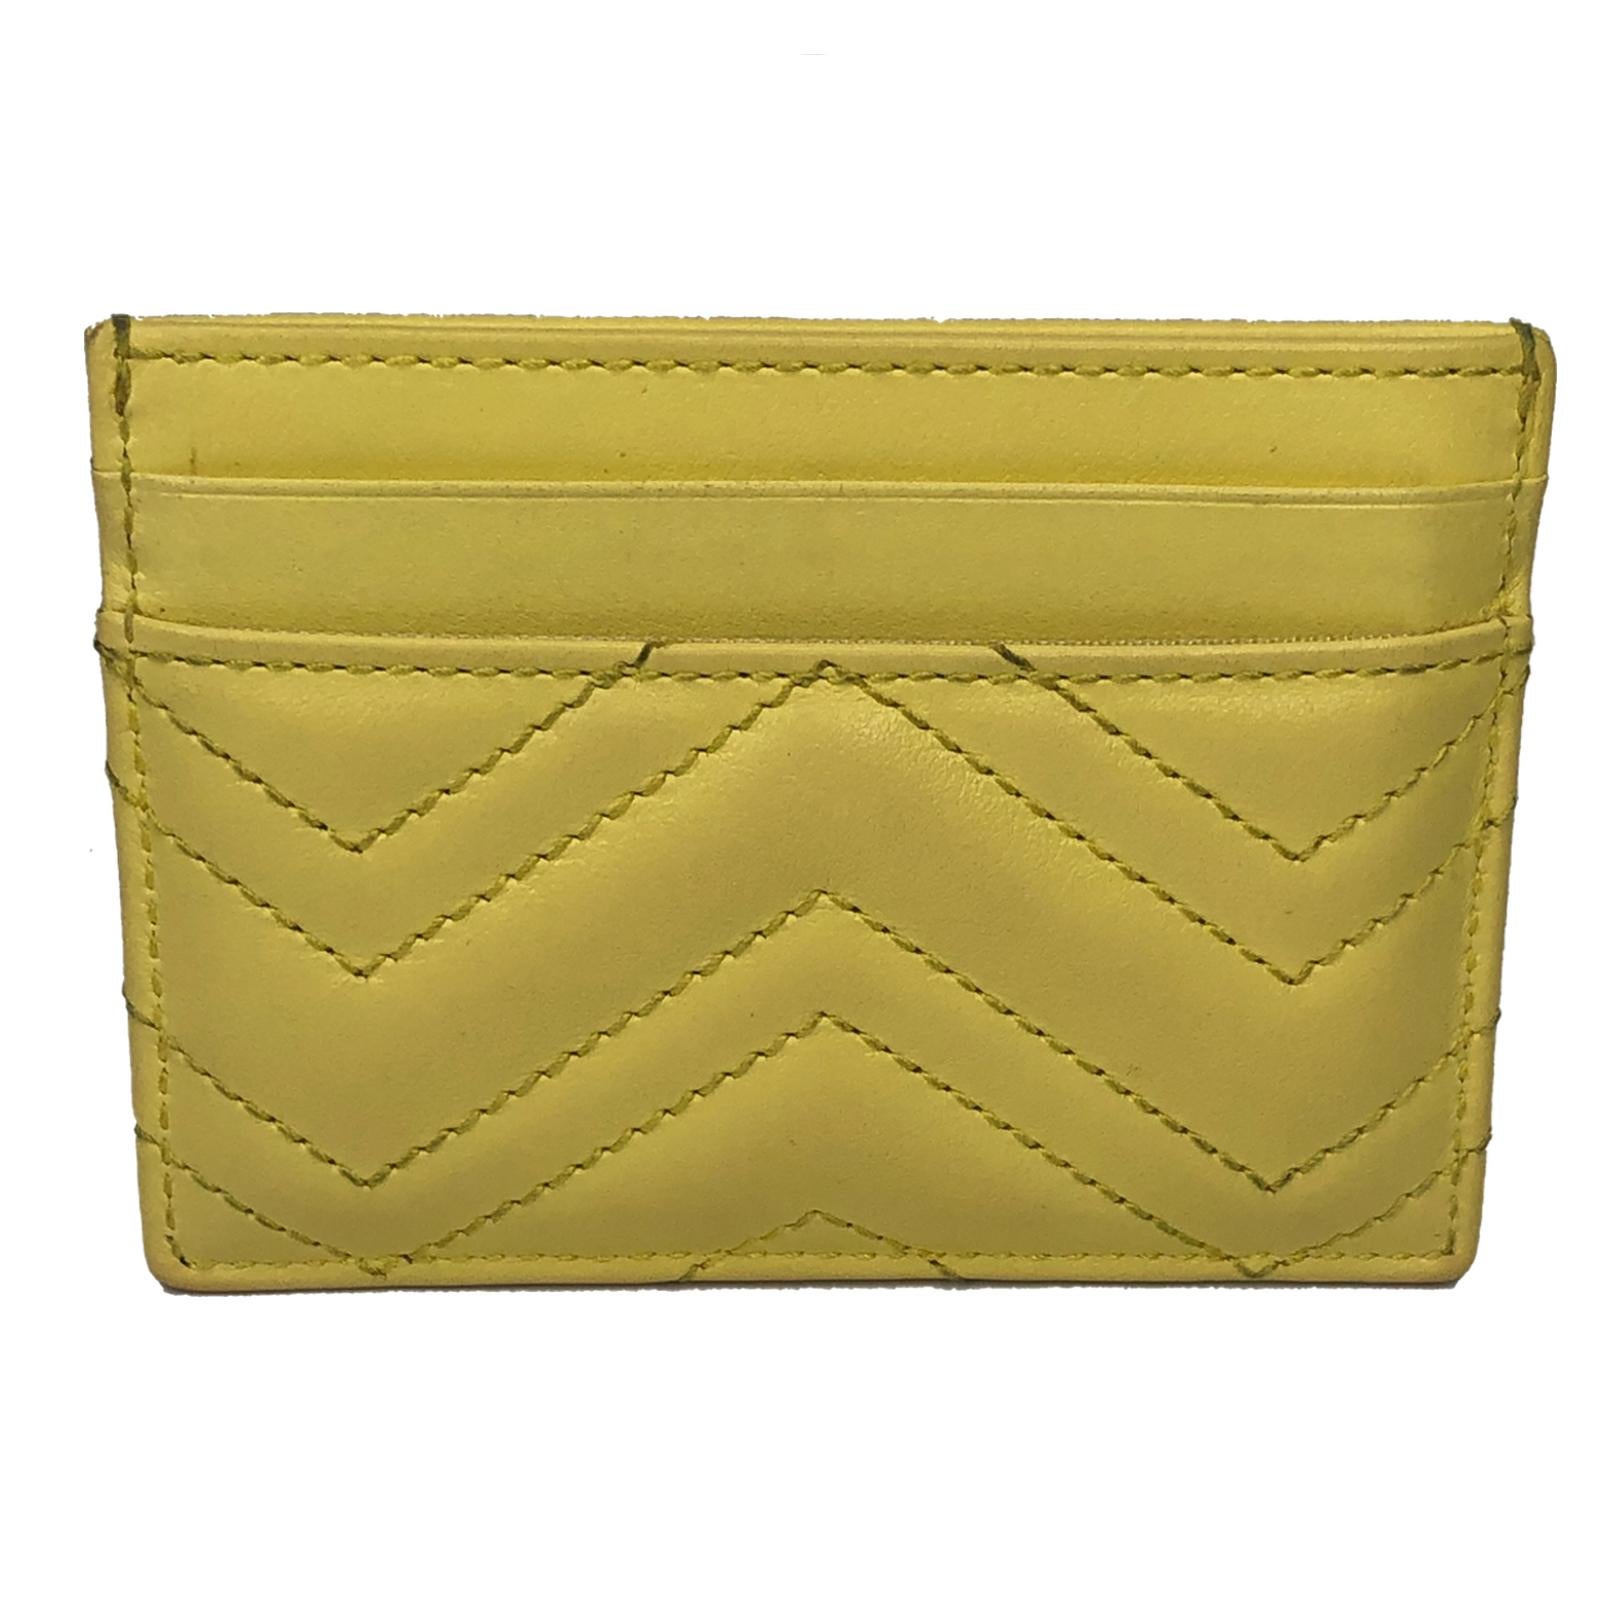 This Gucci card holder is made with yellow chevron quilted calfskin leather, and features a silver double G monogram on the front, and card slots on either side of the main compartment.

COLOR: Pastel yellow
MATERIAL: Calfskin
MEASURE: H 3